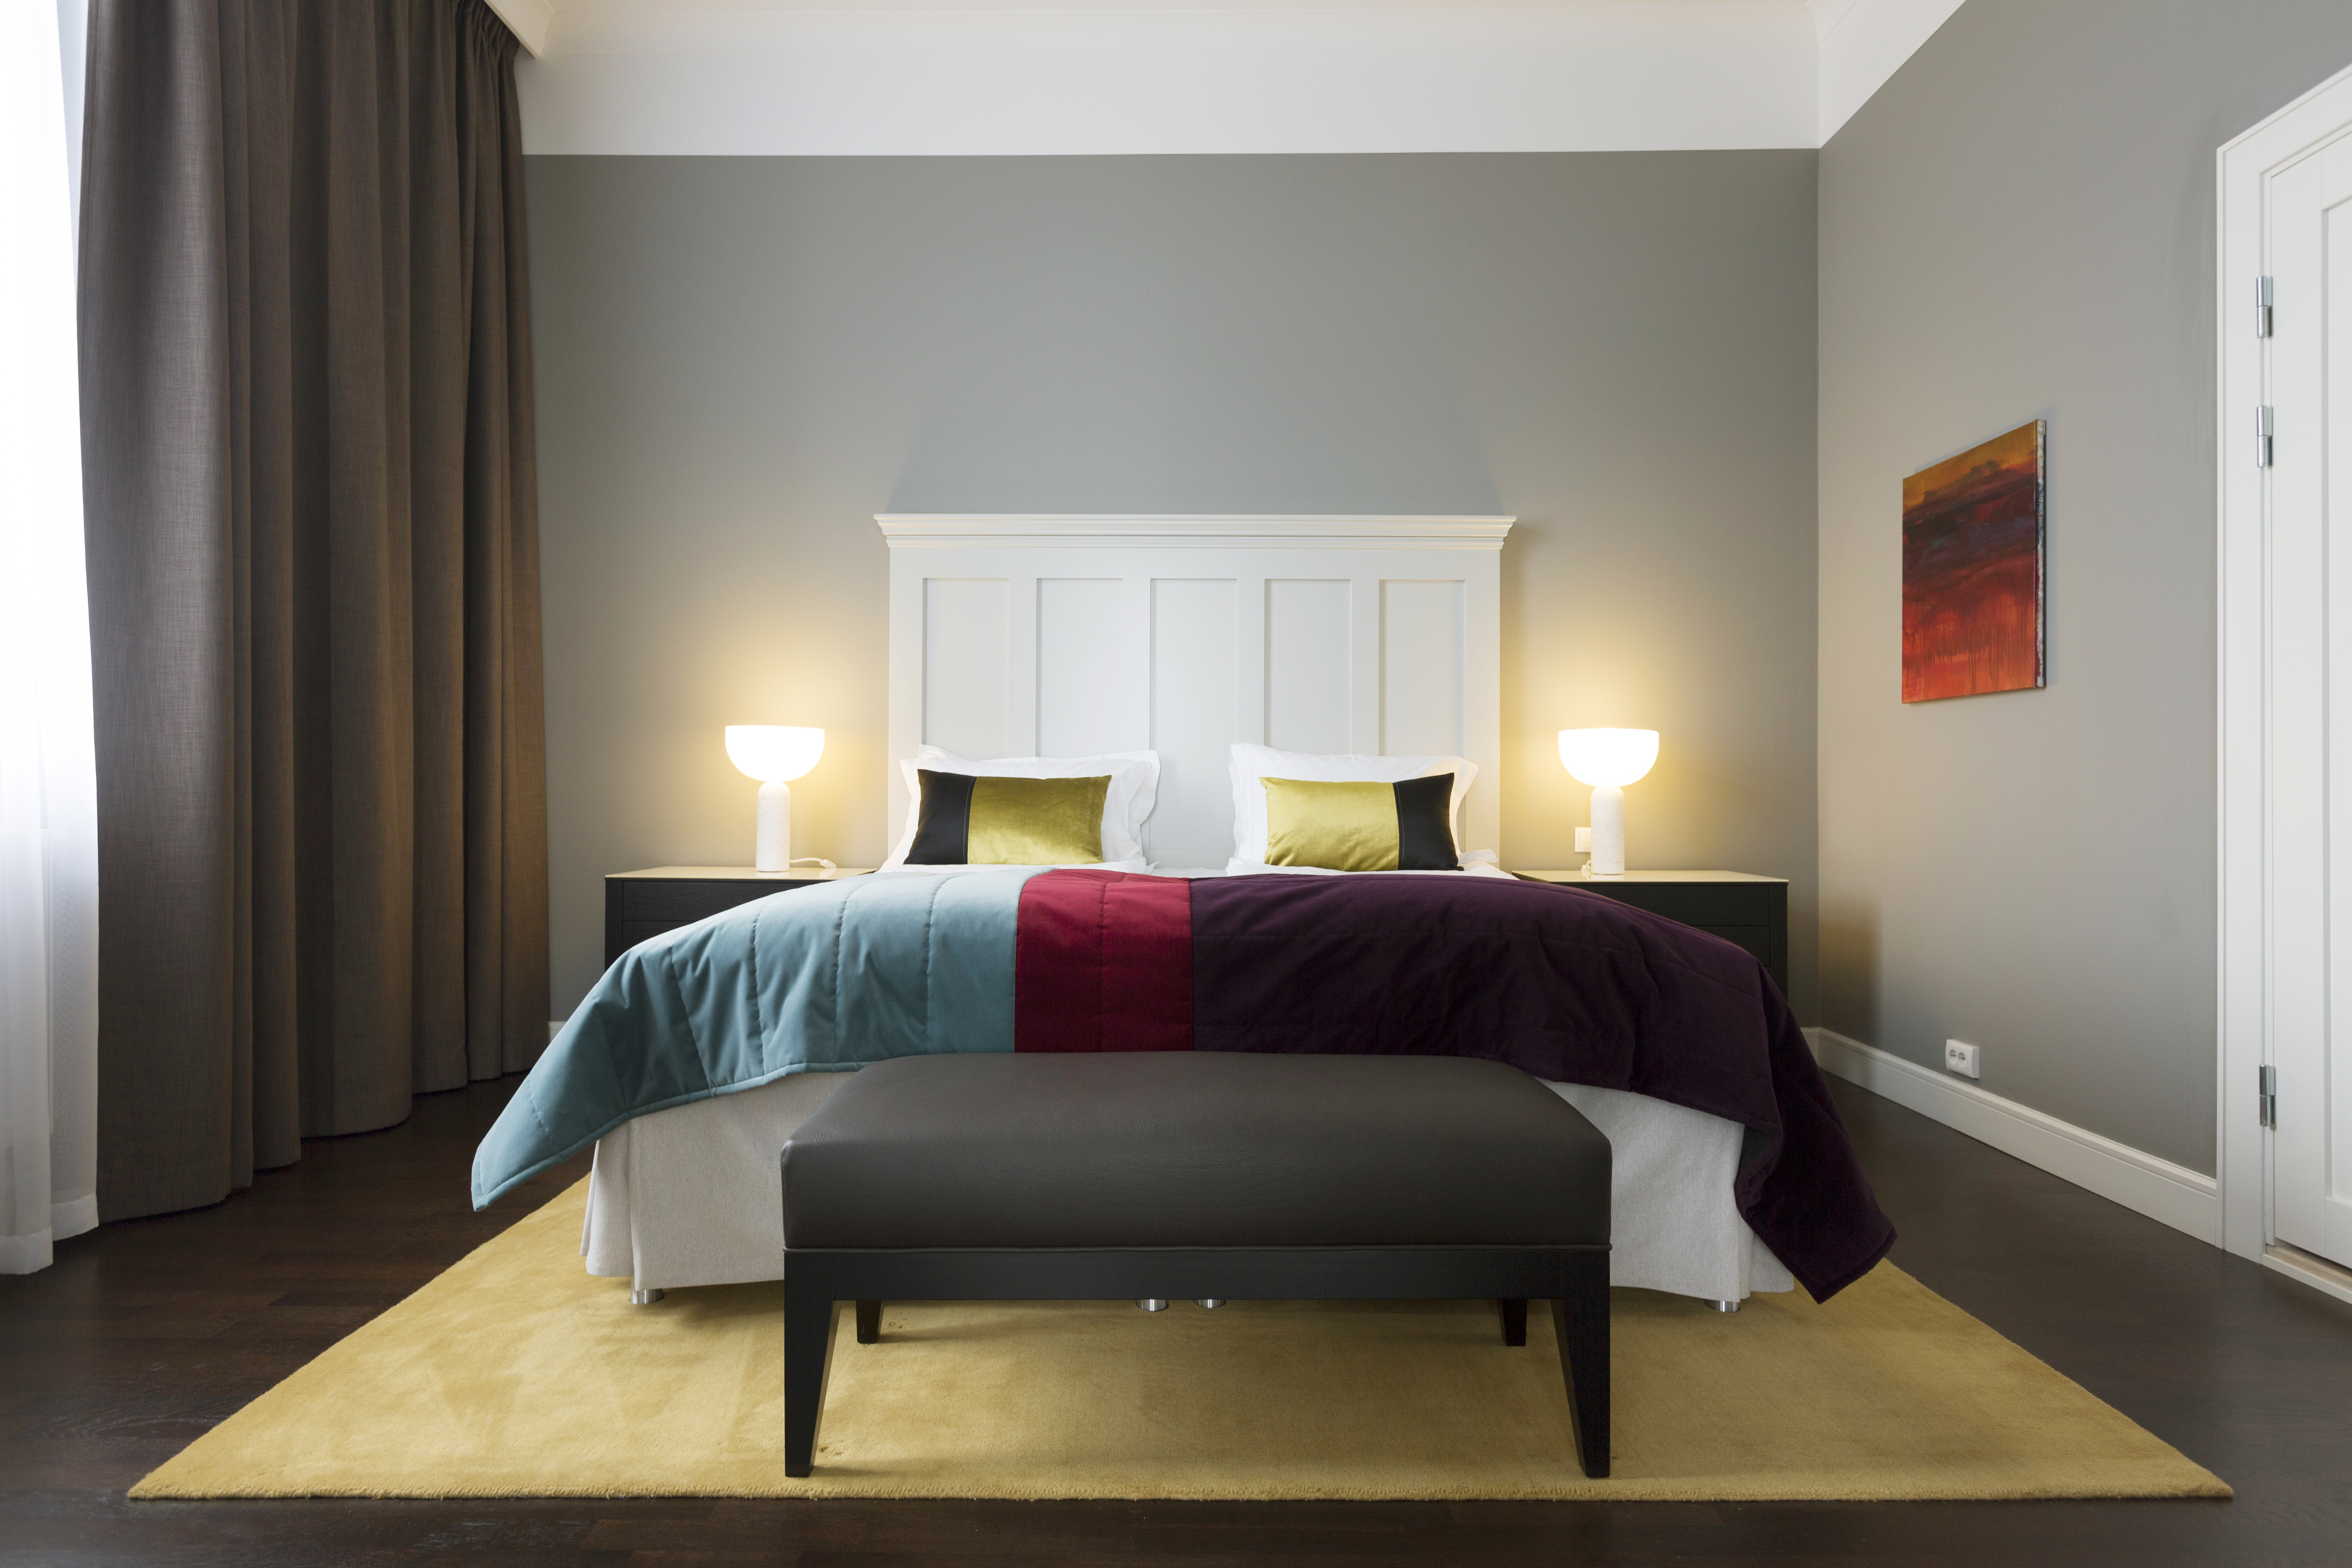 Bright suite with bed, large white headboard and bedside lamps